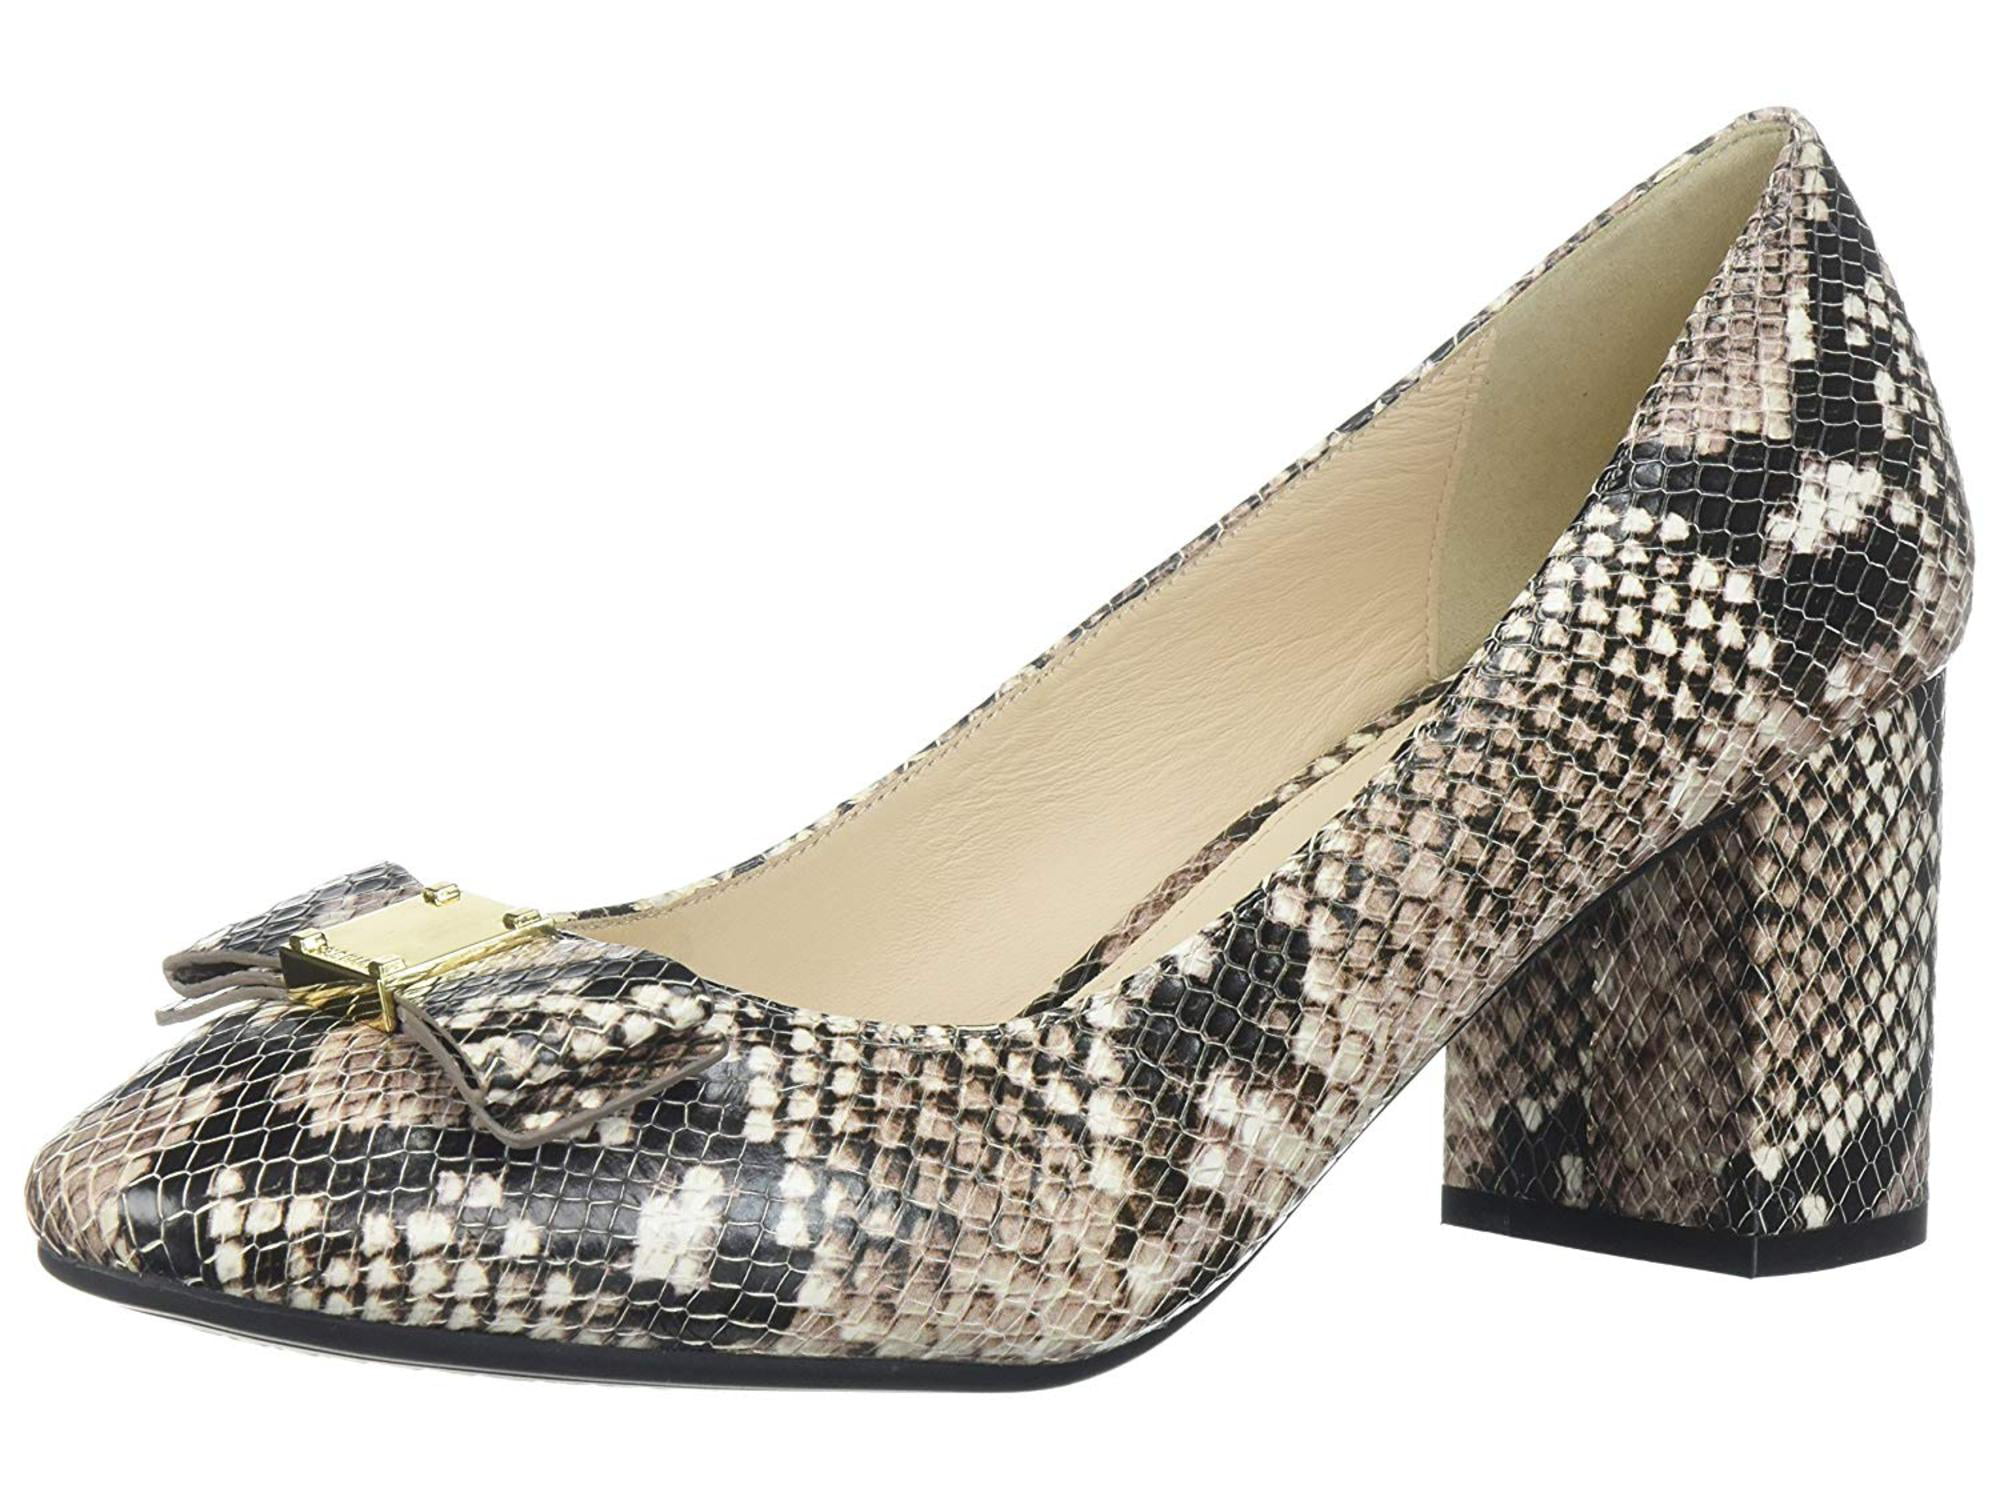 New COLE HAAN Womens TALI BOW PUMP Snake Print Leather Dress Shoes W09056 